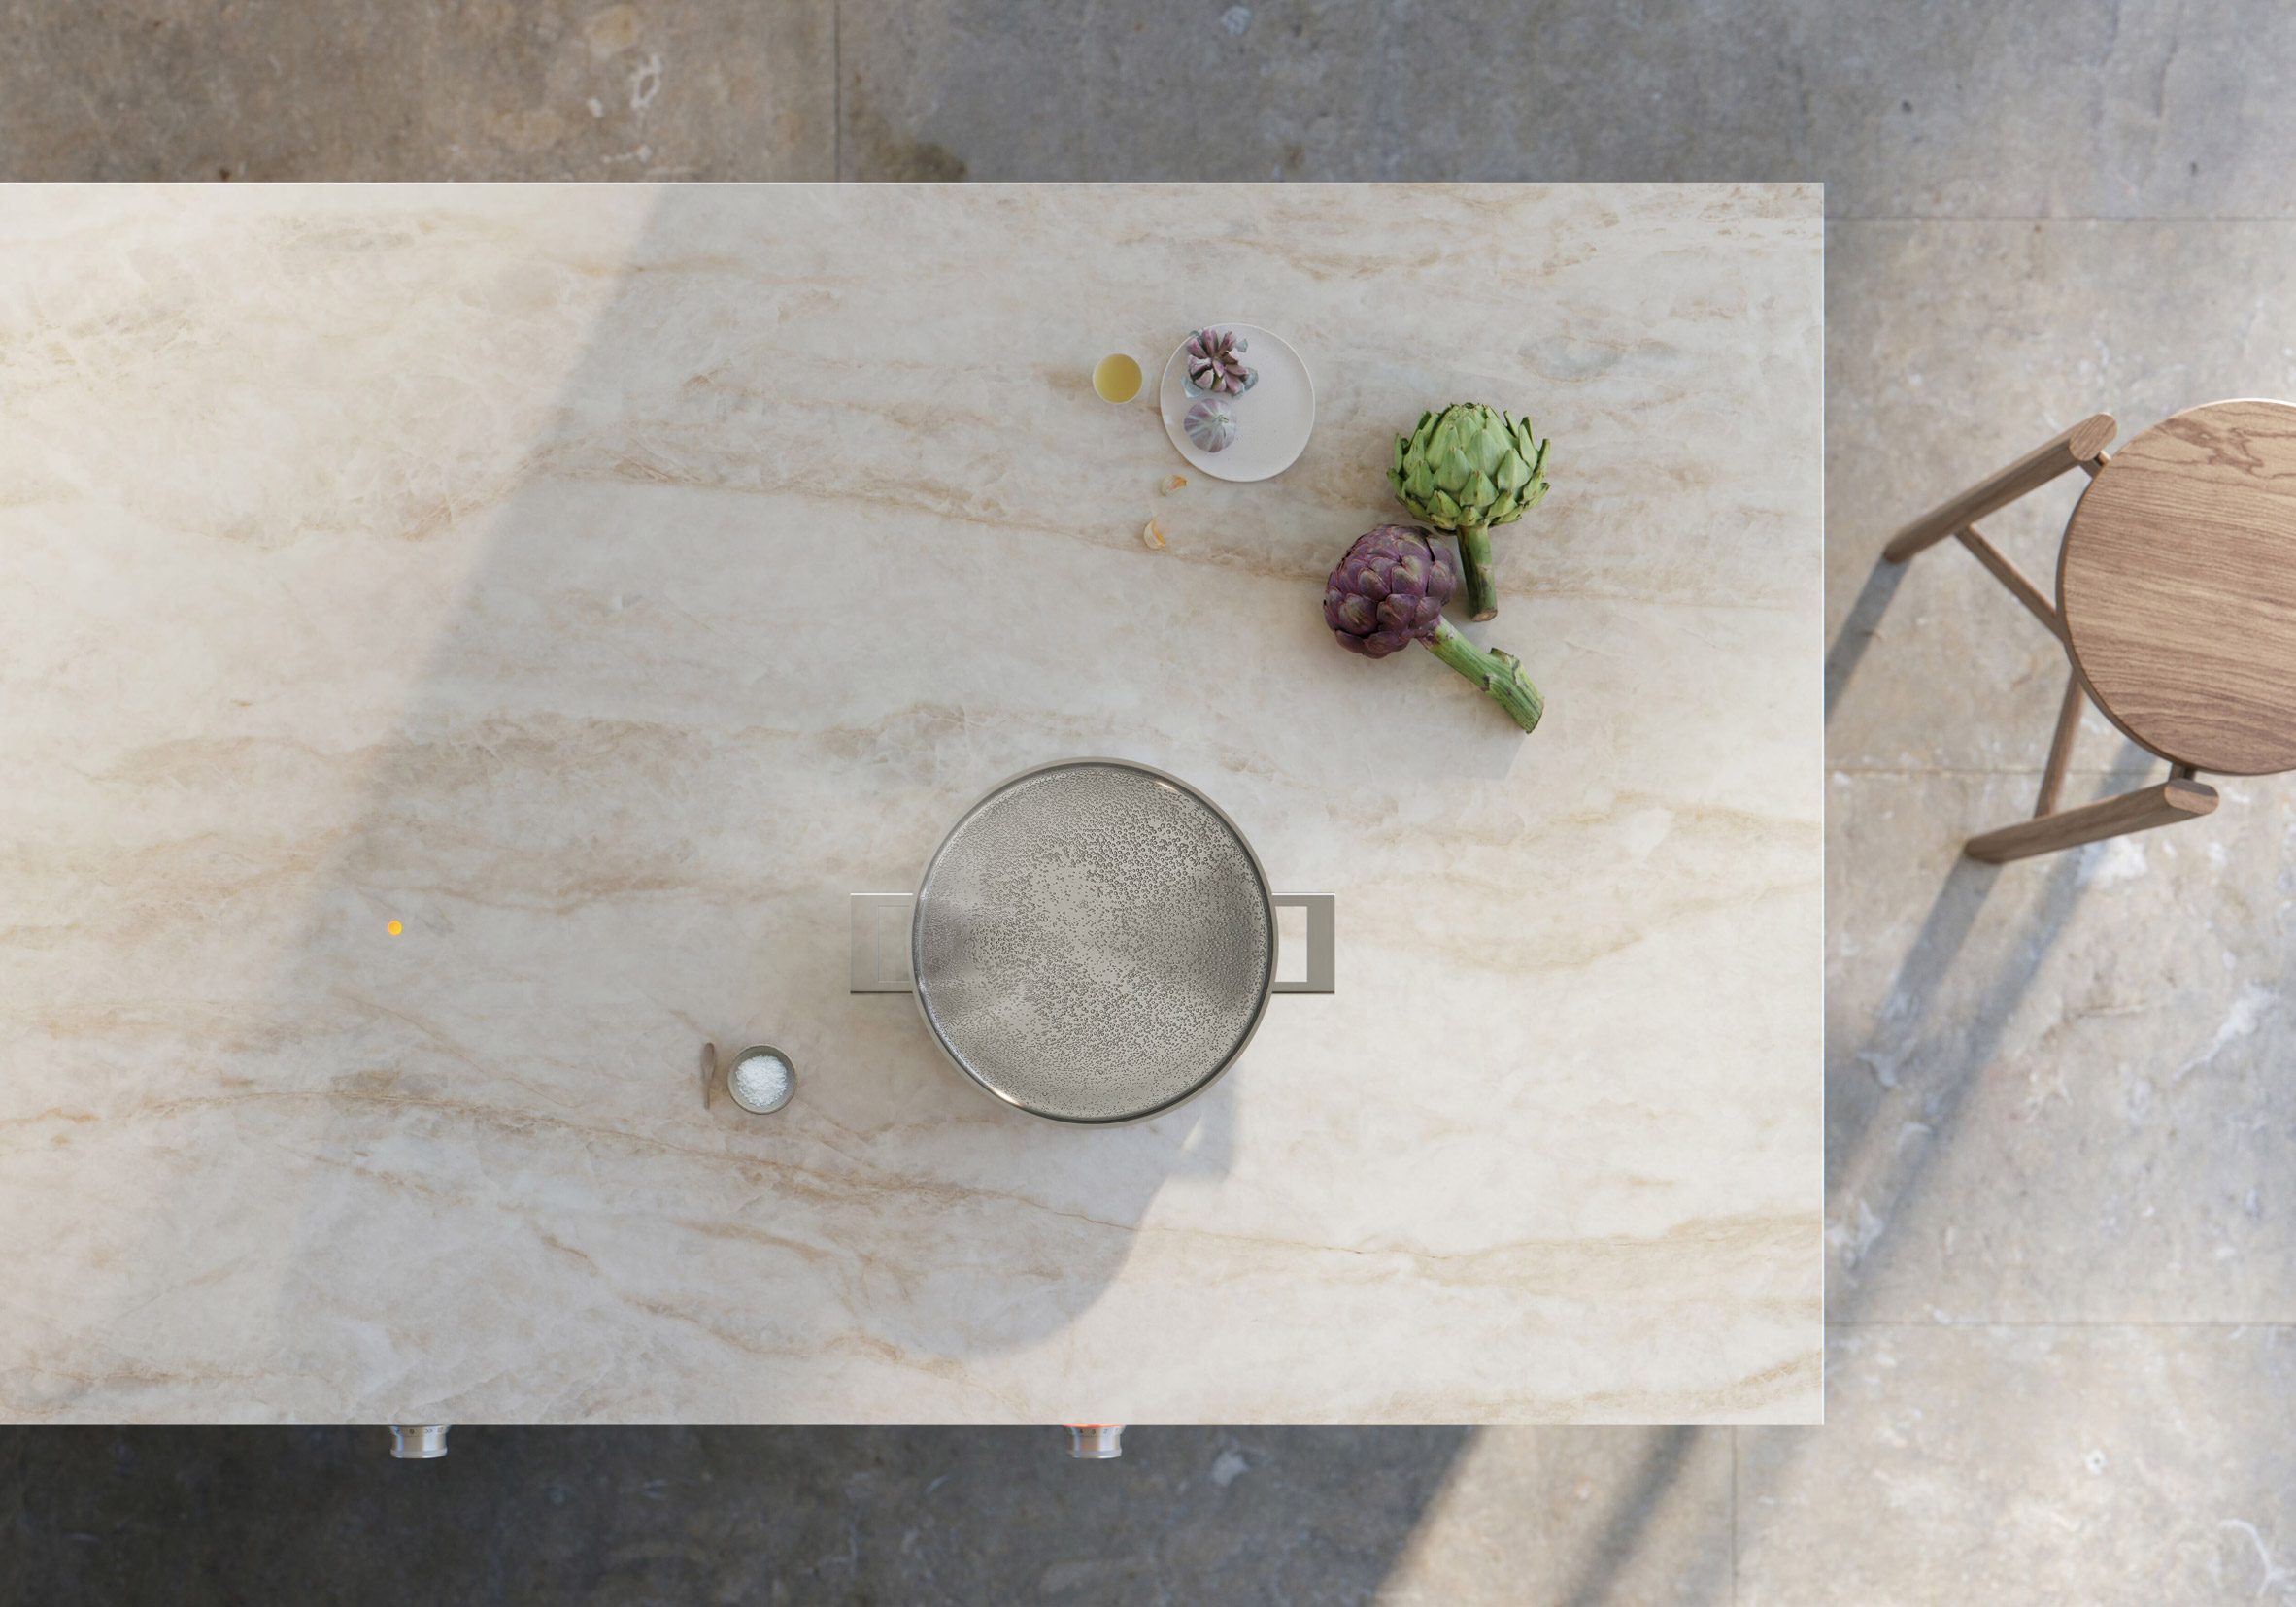 Gaggenau's The Essential Induction cooktop with a pan and vegetables placed on it